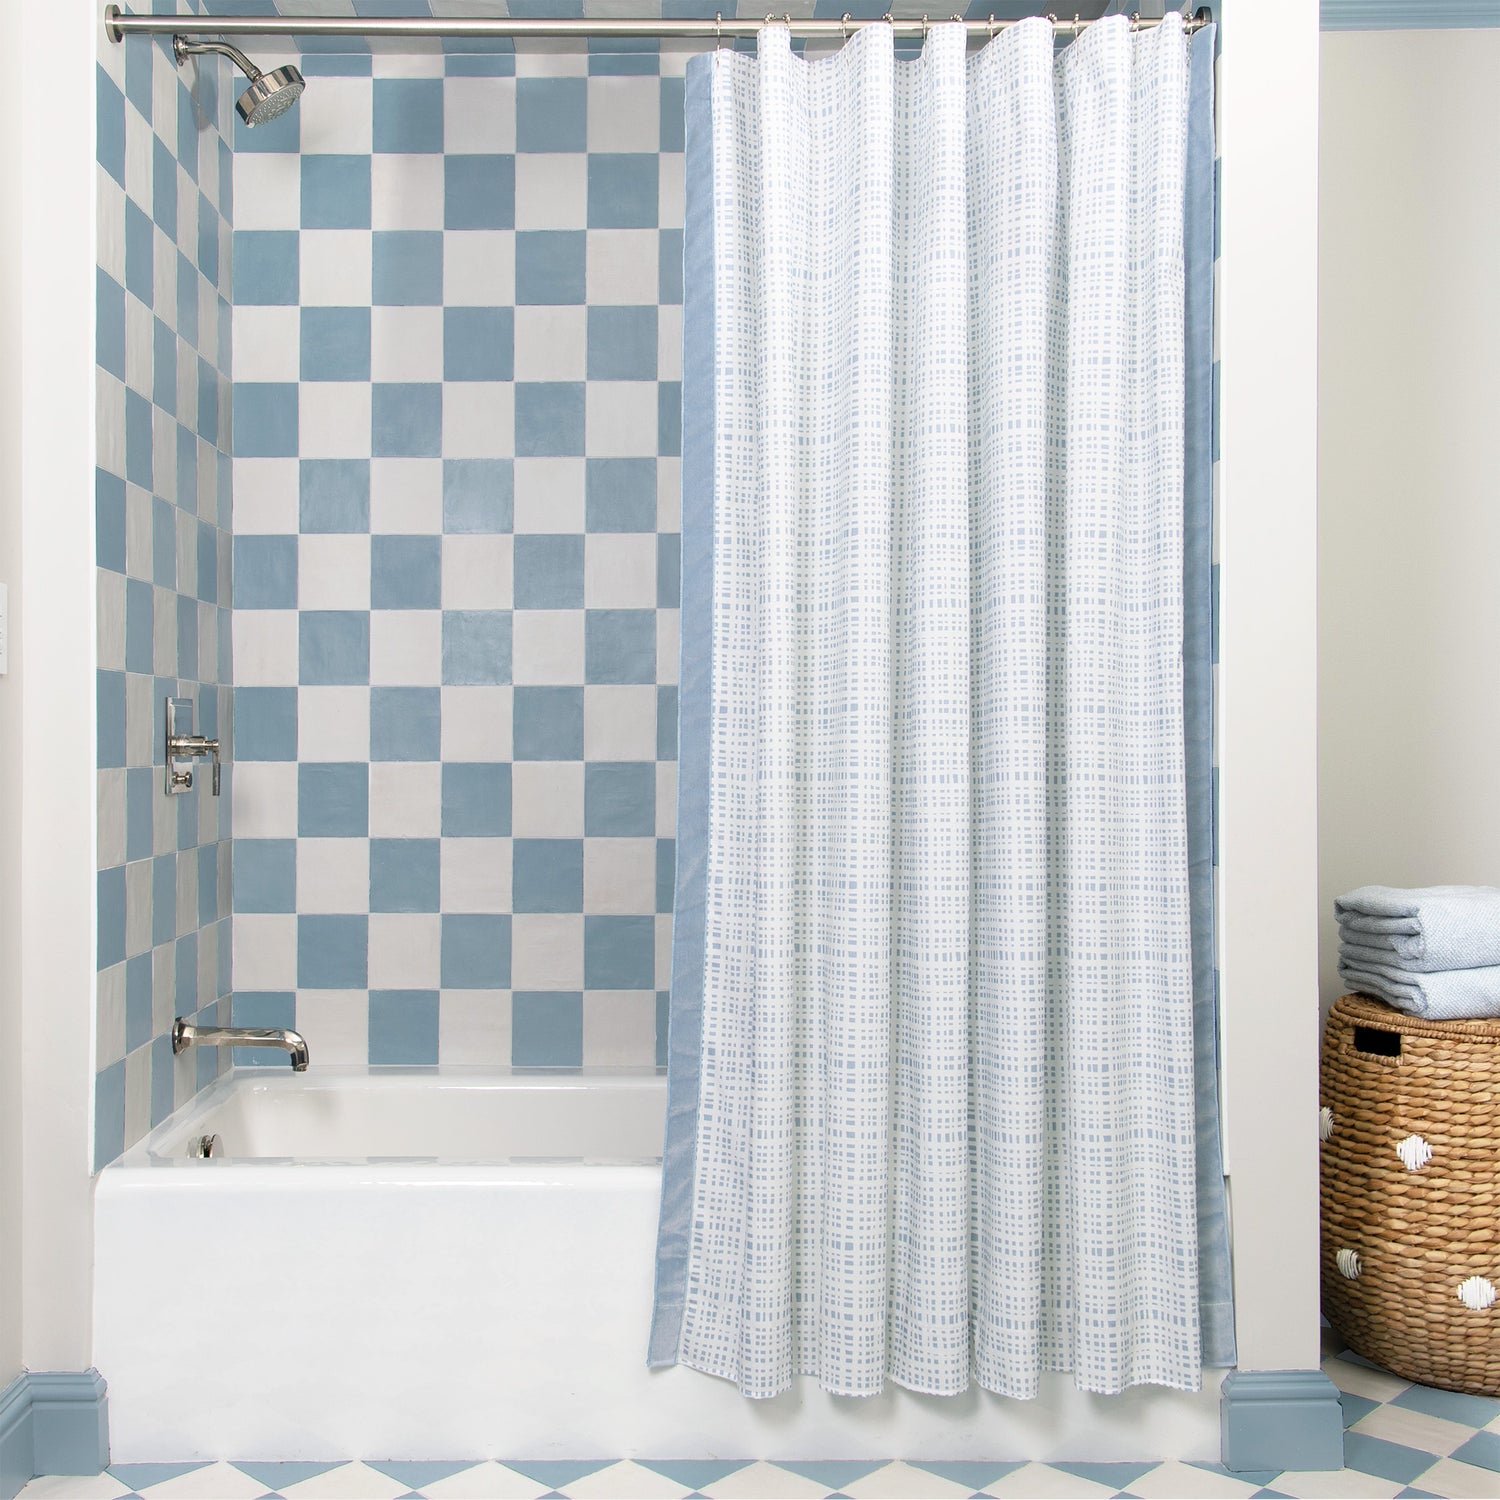 Sky Blue Gingham shower curtain with sky blue velvet band hanging on rod in front of white tub in bathroom with blue and white tiles